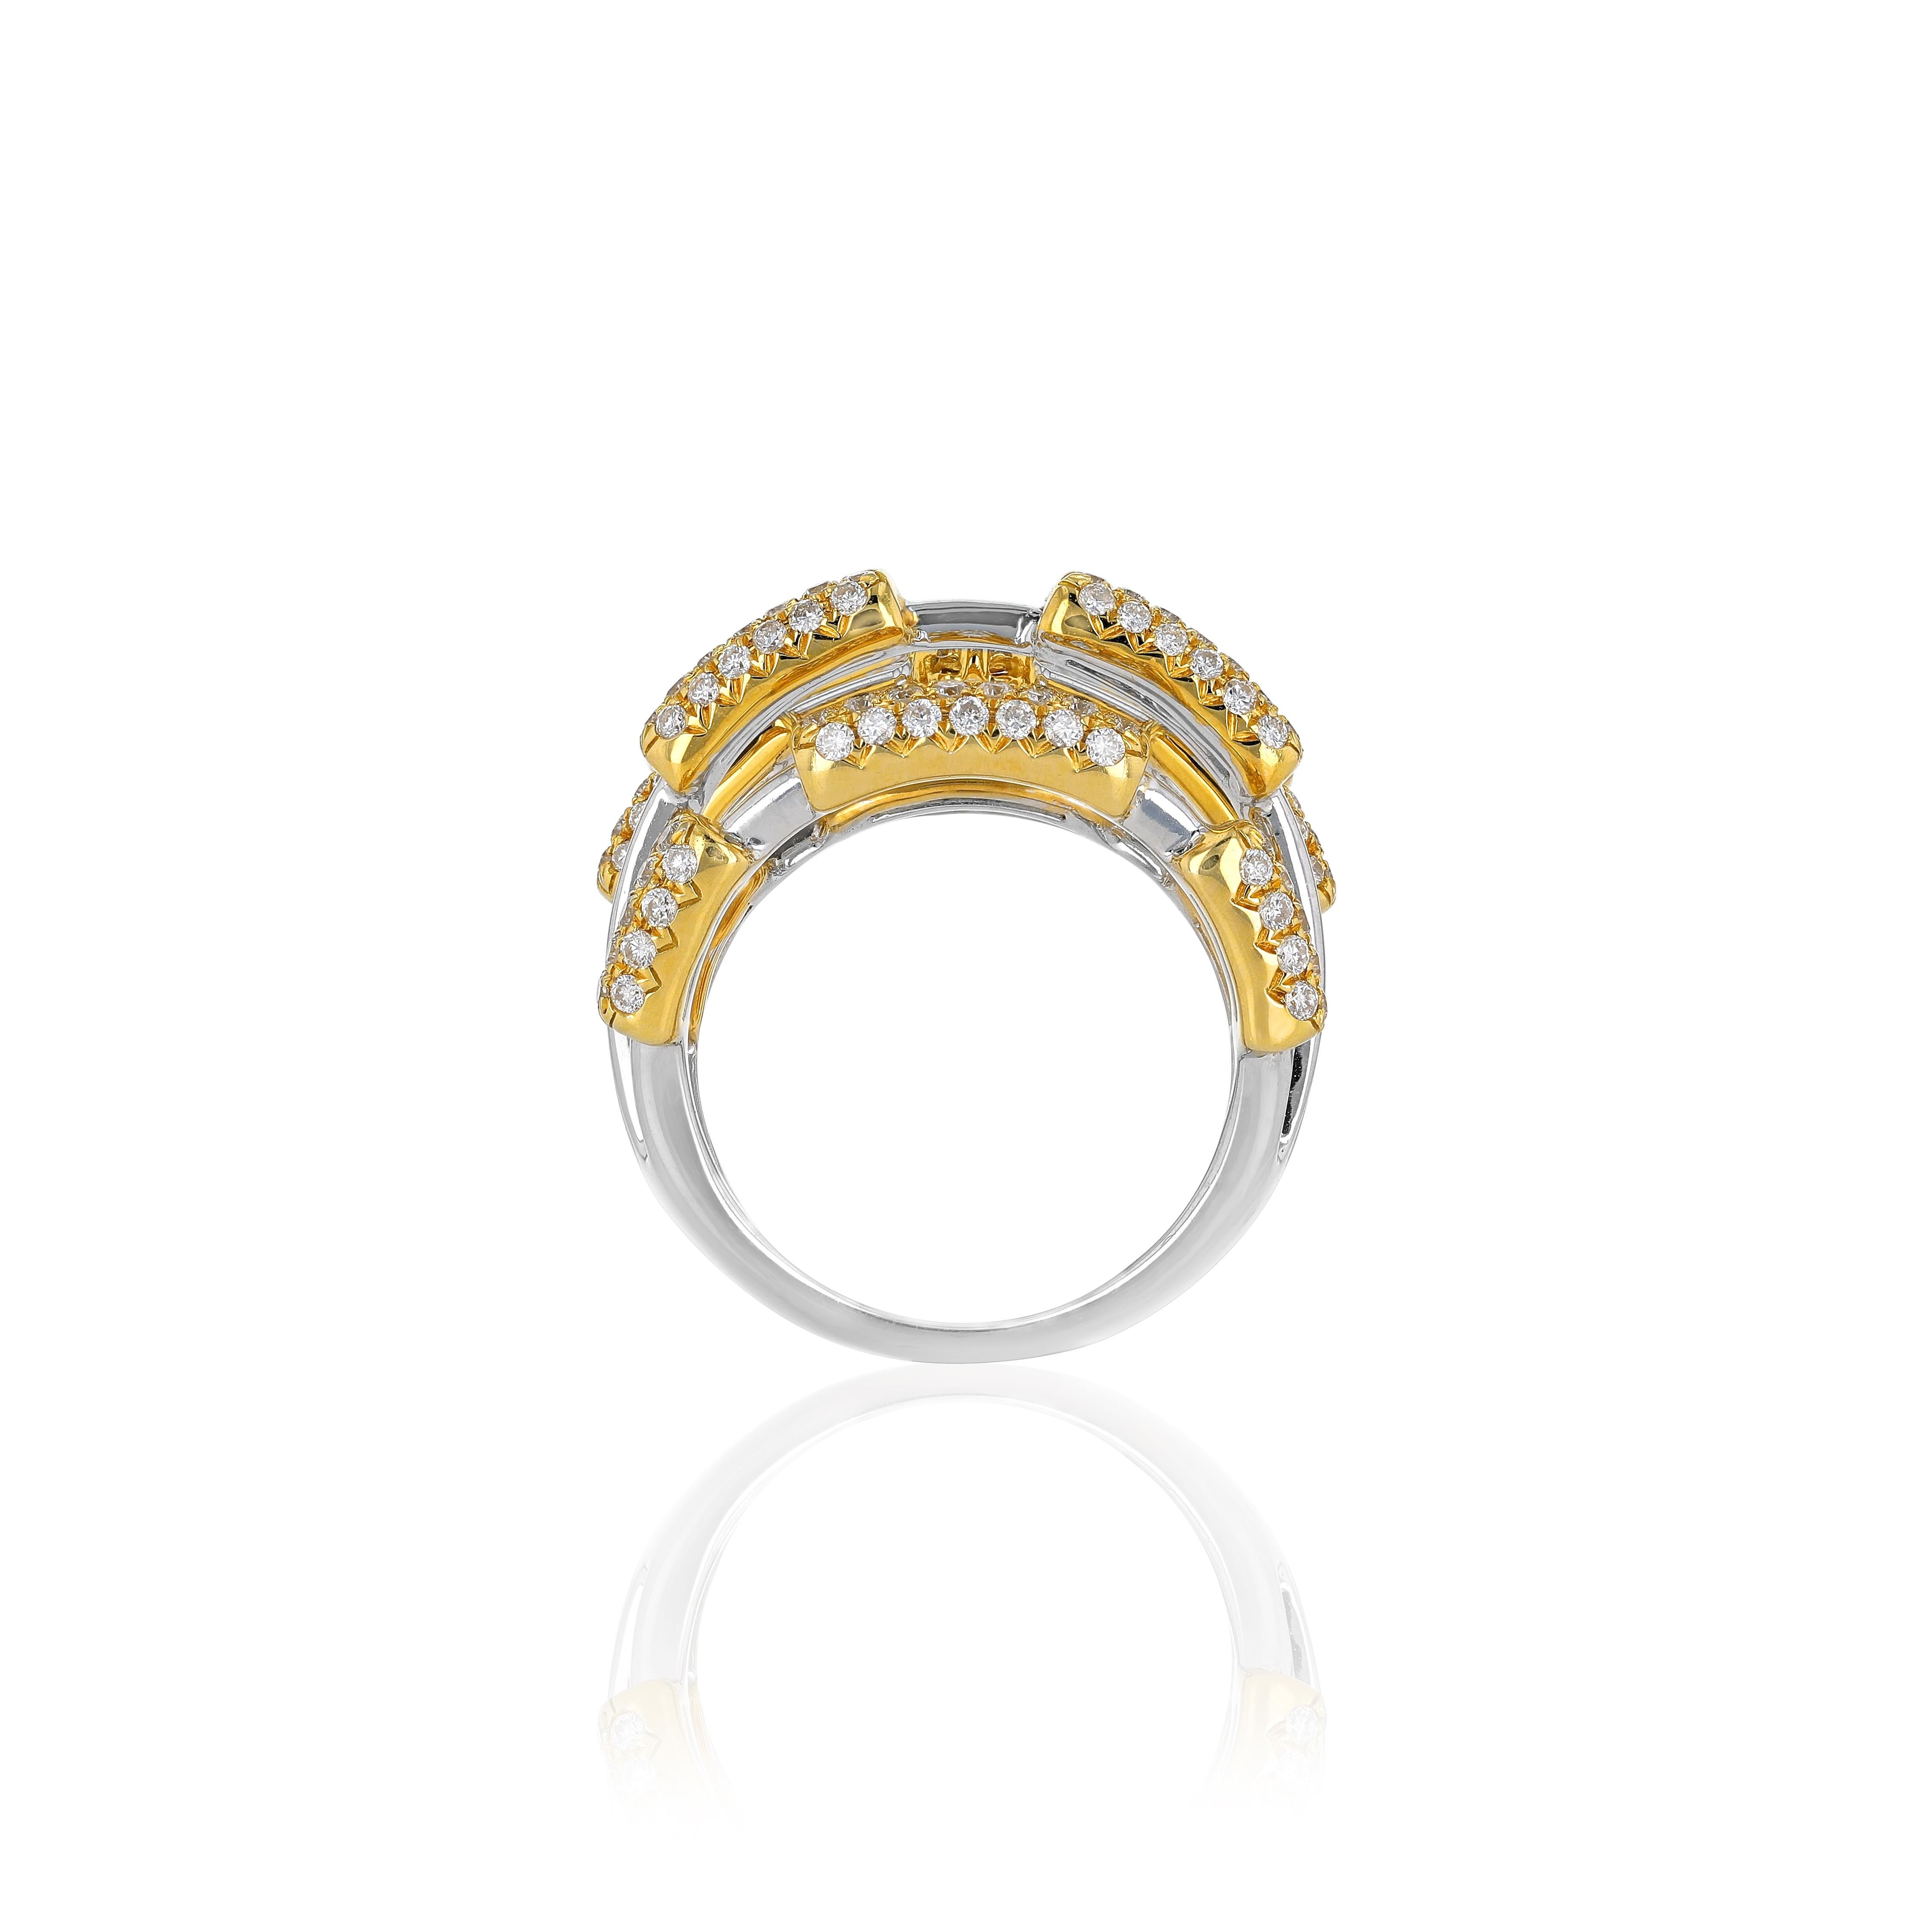 A modern design, this white gold ring features dynamic layers of scintillating 18 karat yellow gold centered by an exquisite 1.6 carat HI color round shape diamond. This vibrant gold and diamond ring showcases Amwaj skill at custom cutting